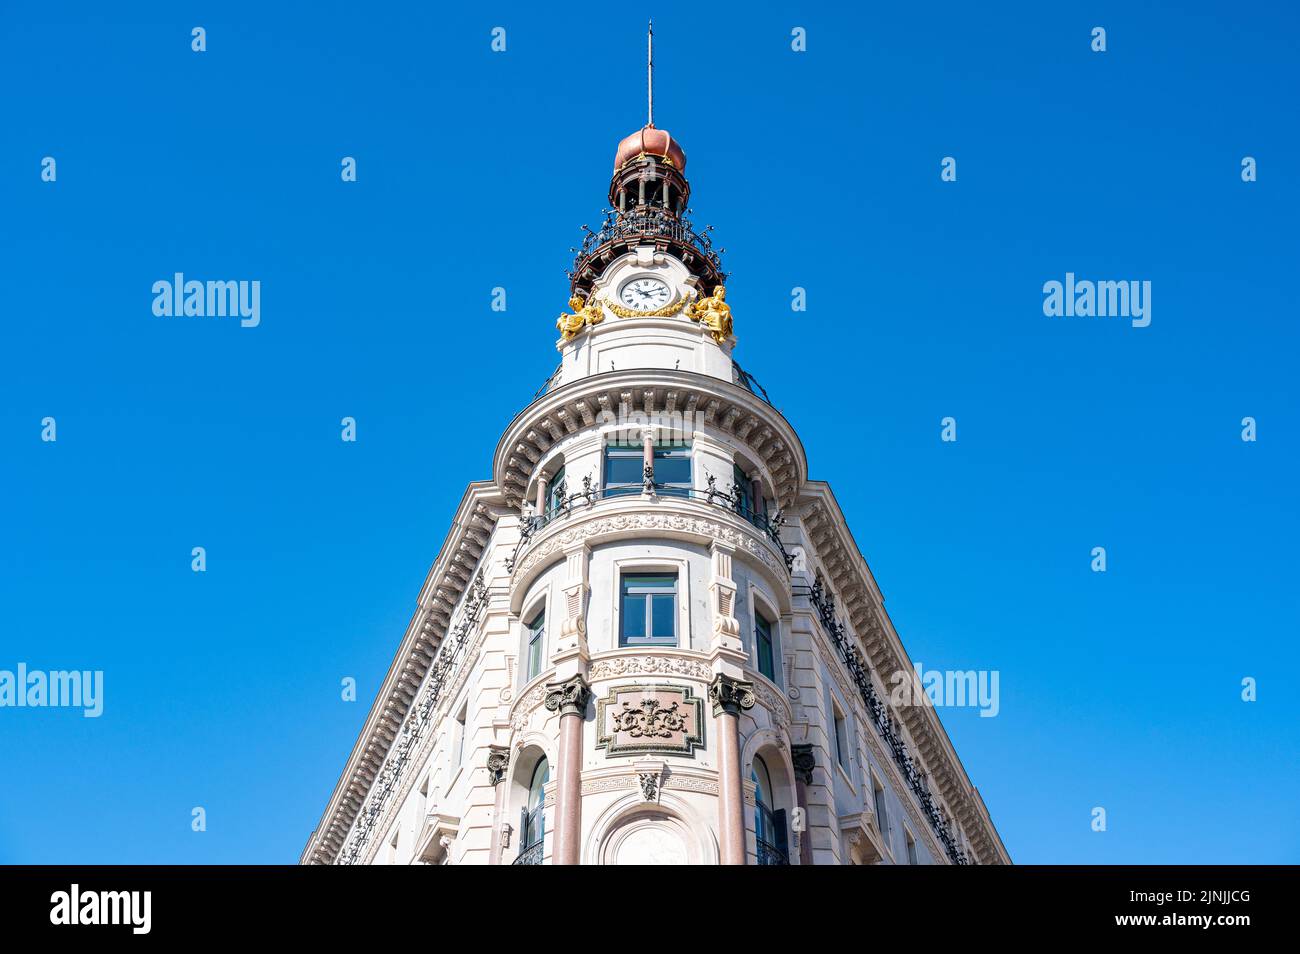 Architecture of the Four Seasons Hotel And Private Residences. Low angle view of the clock tower. Stock Photo